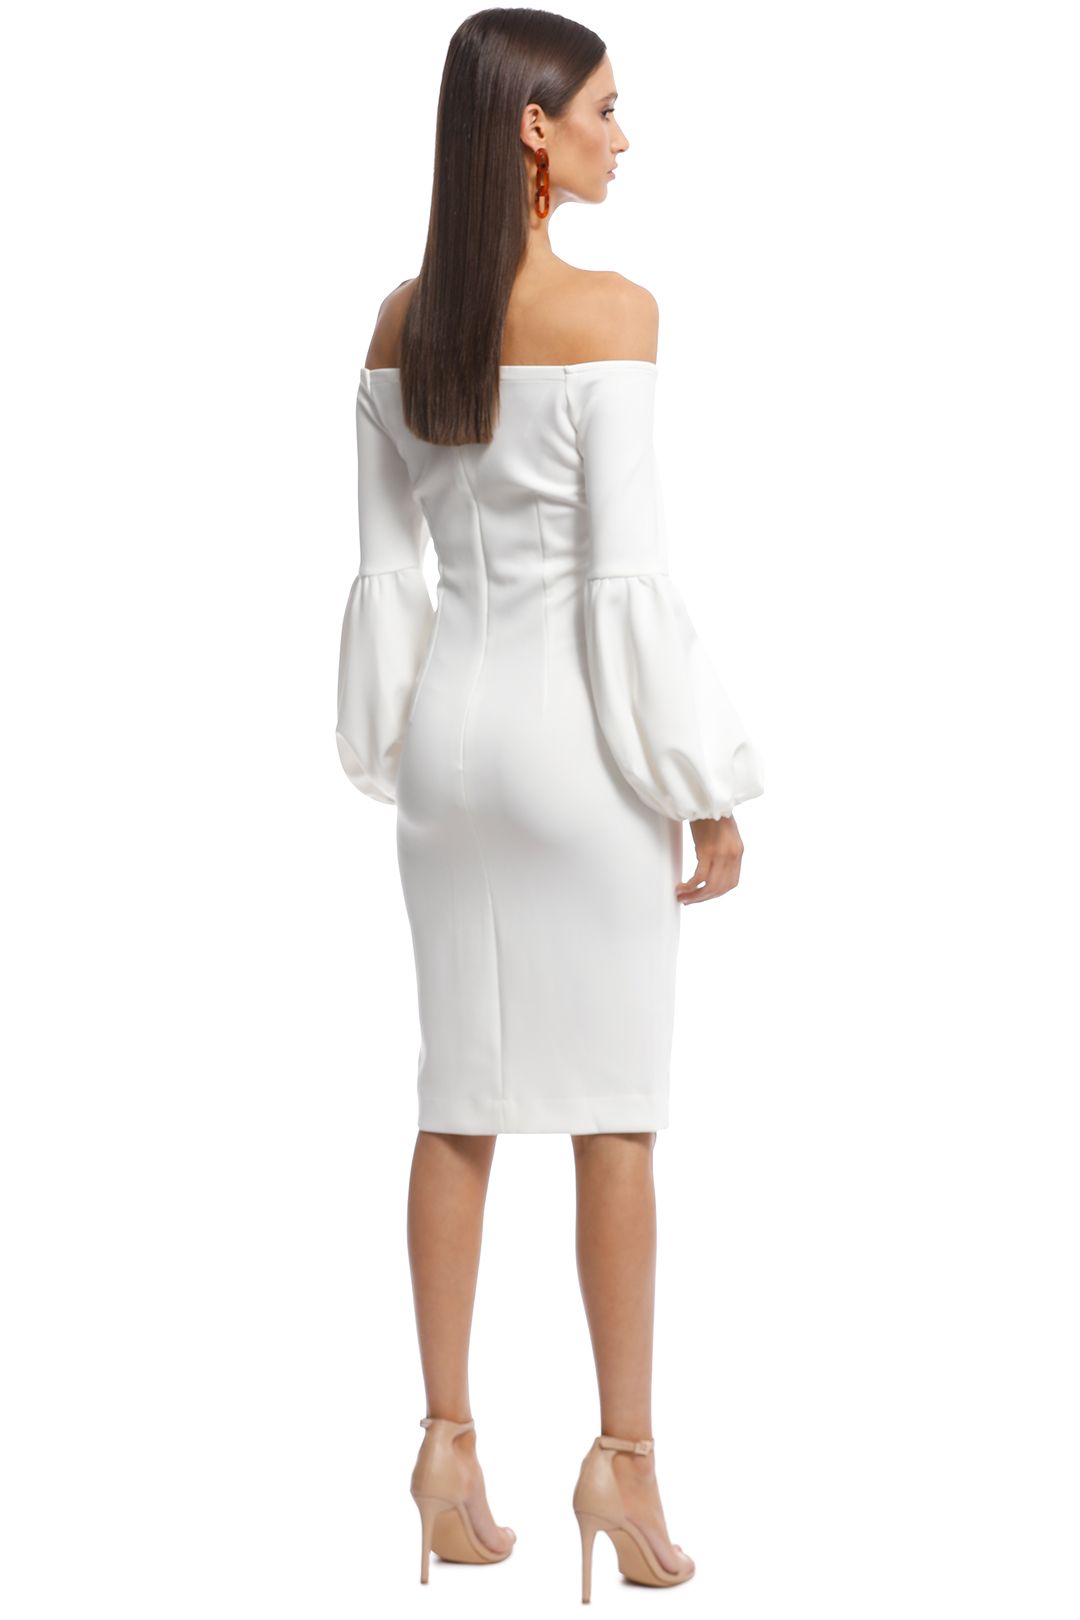 Maurie and Eve - Serres Dress - White - Back